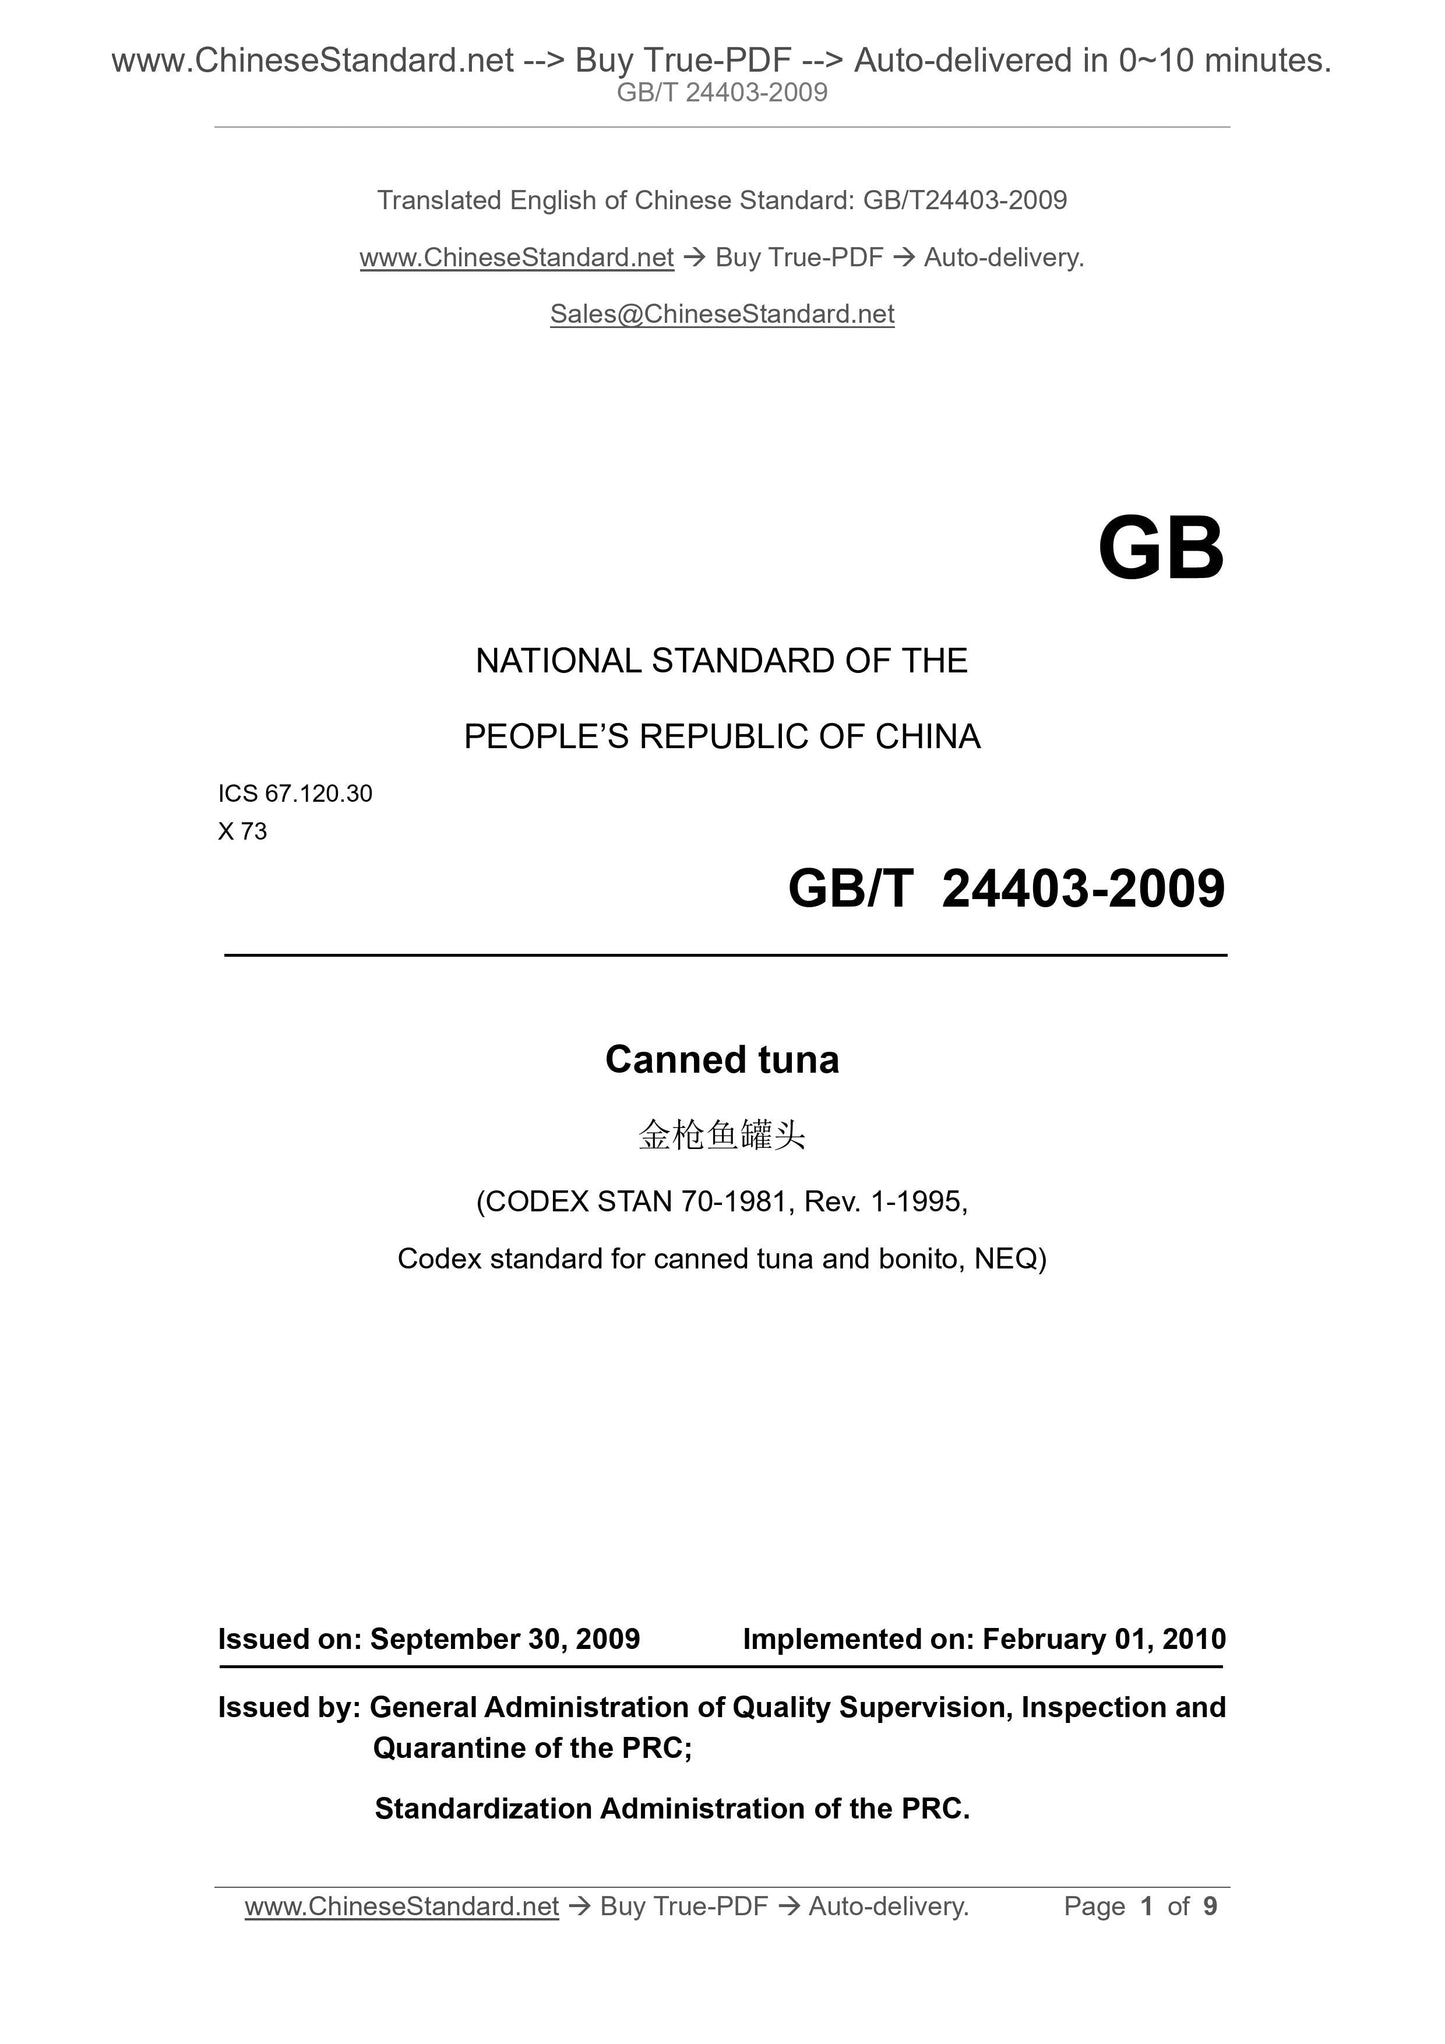 GB/T 24403-2009 Page 1